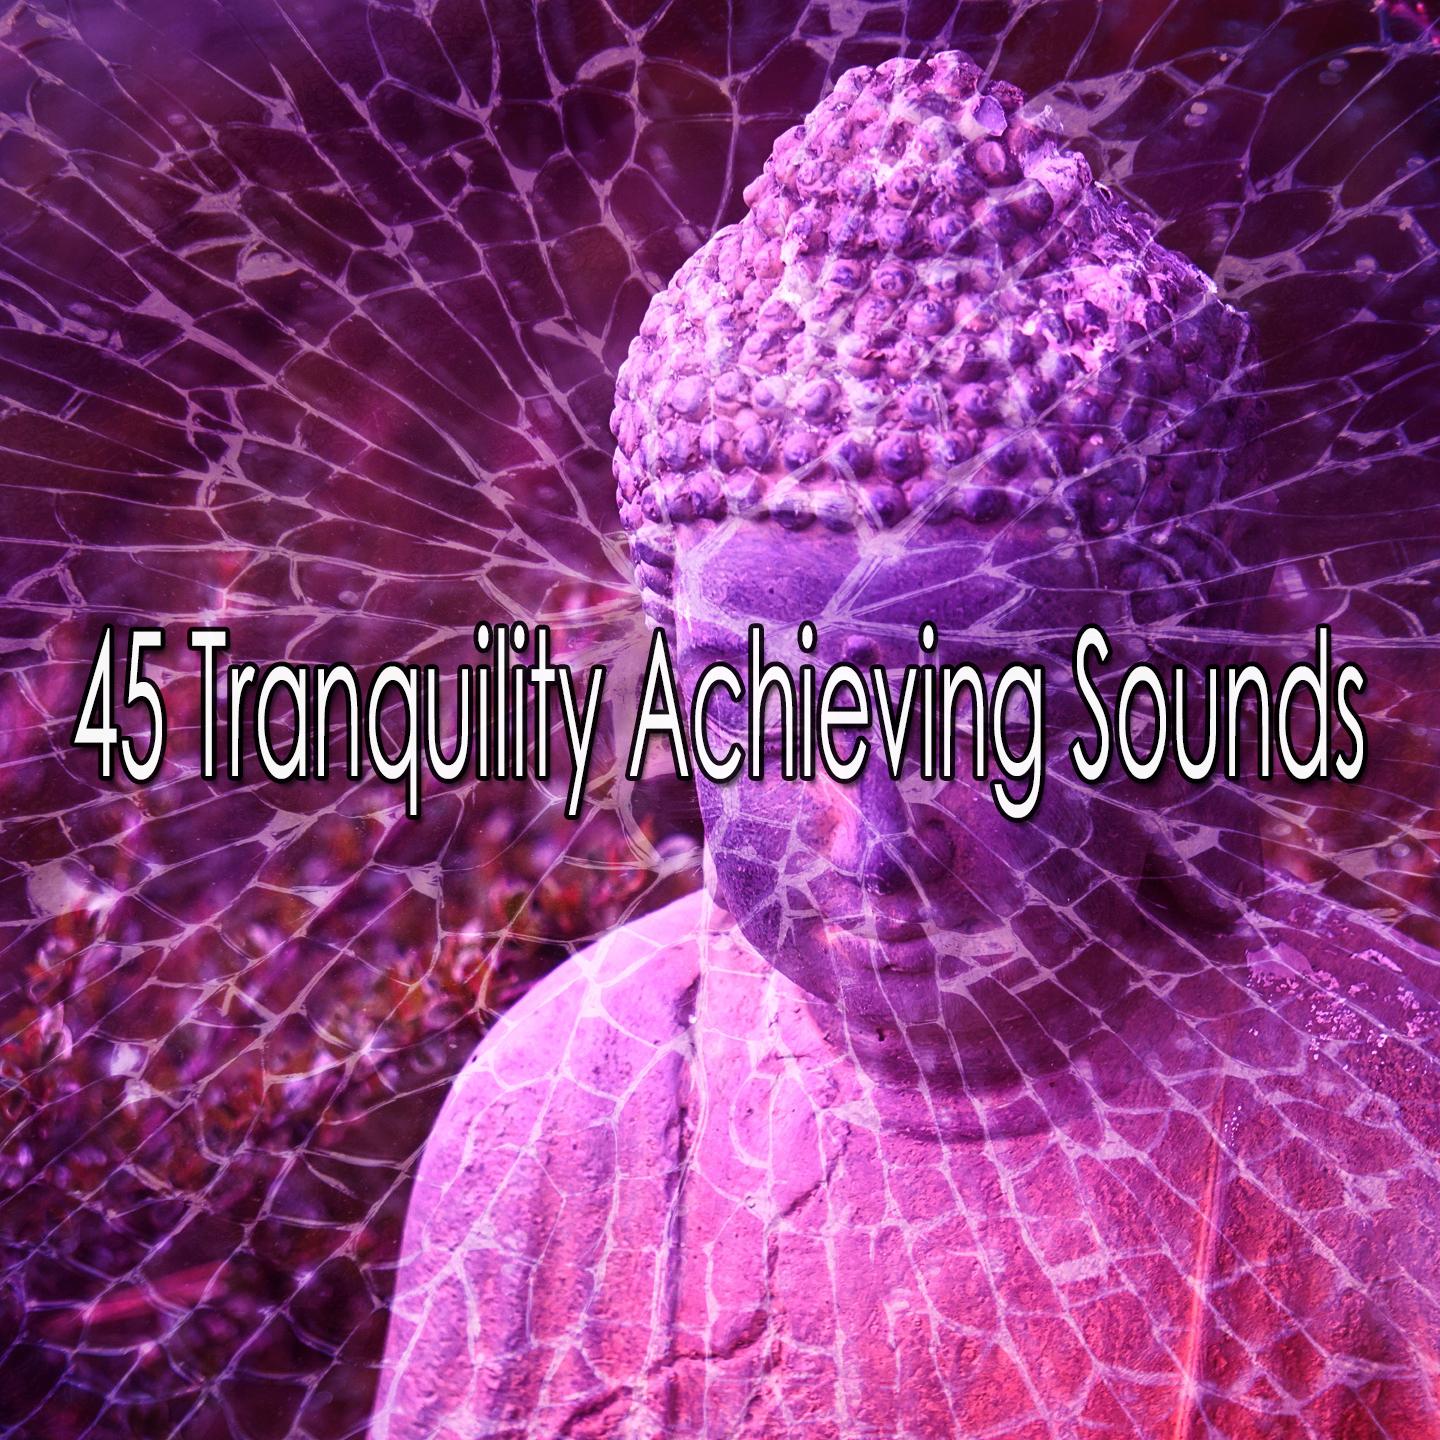 45 Tranquility Achieving Sounds